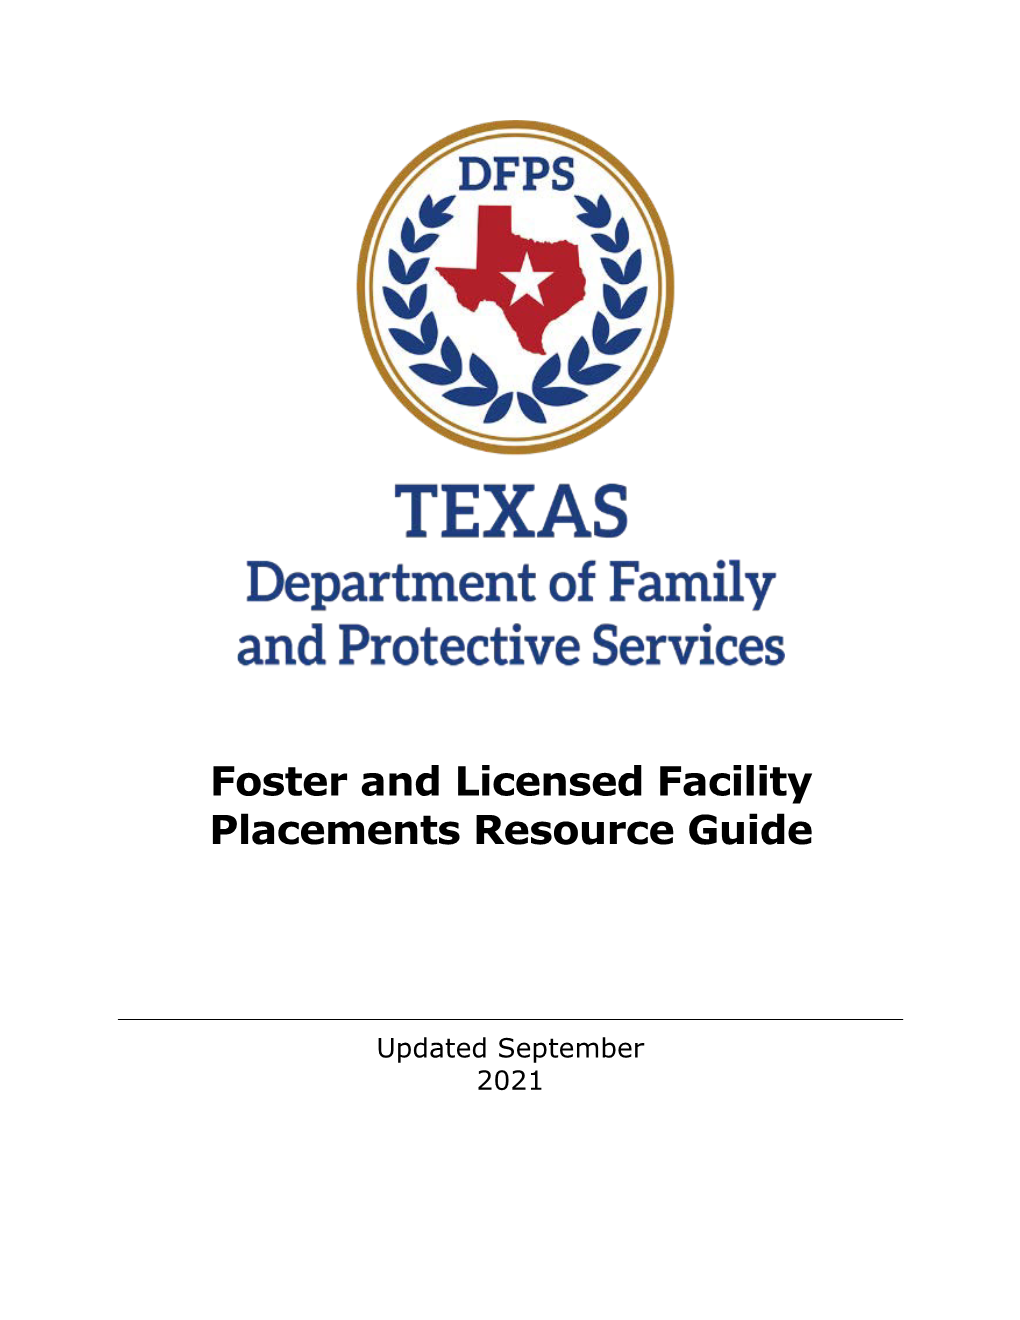 Foster and Licensed Facility Placements Resource Guide